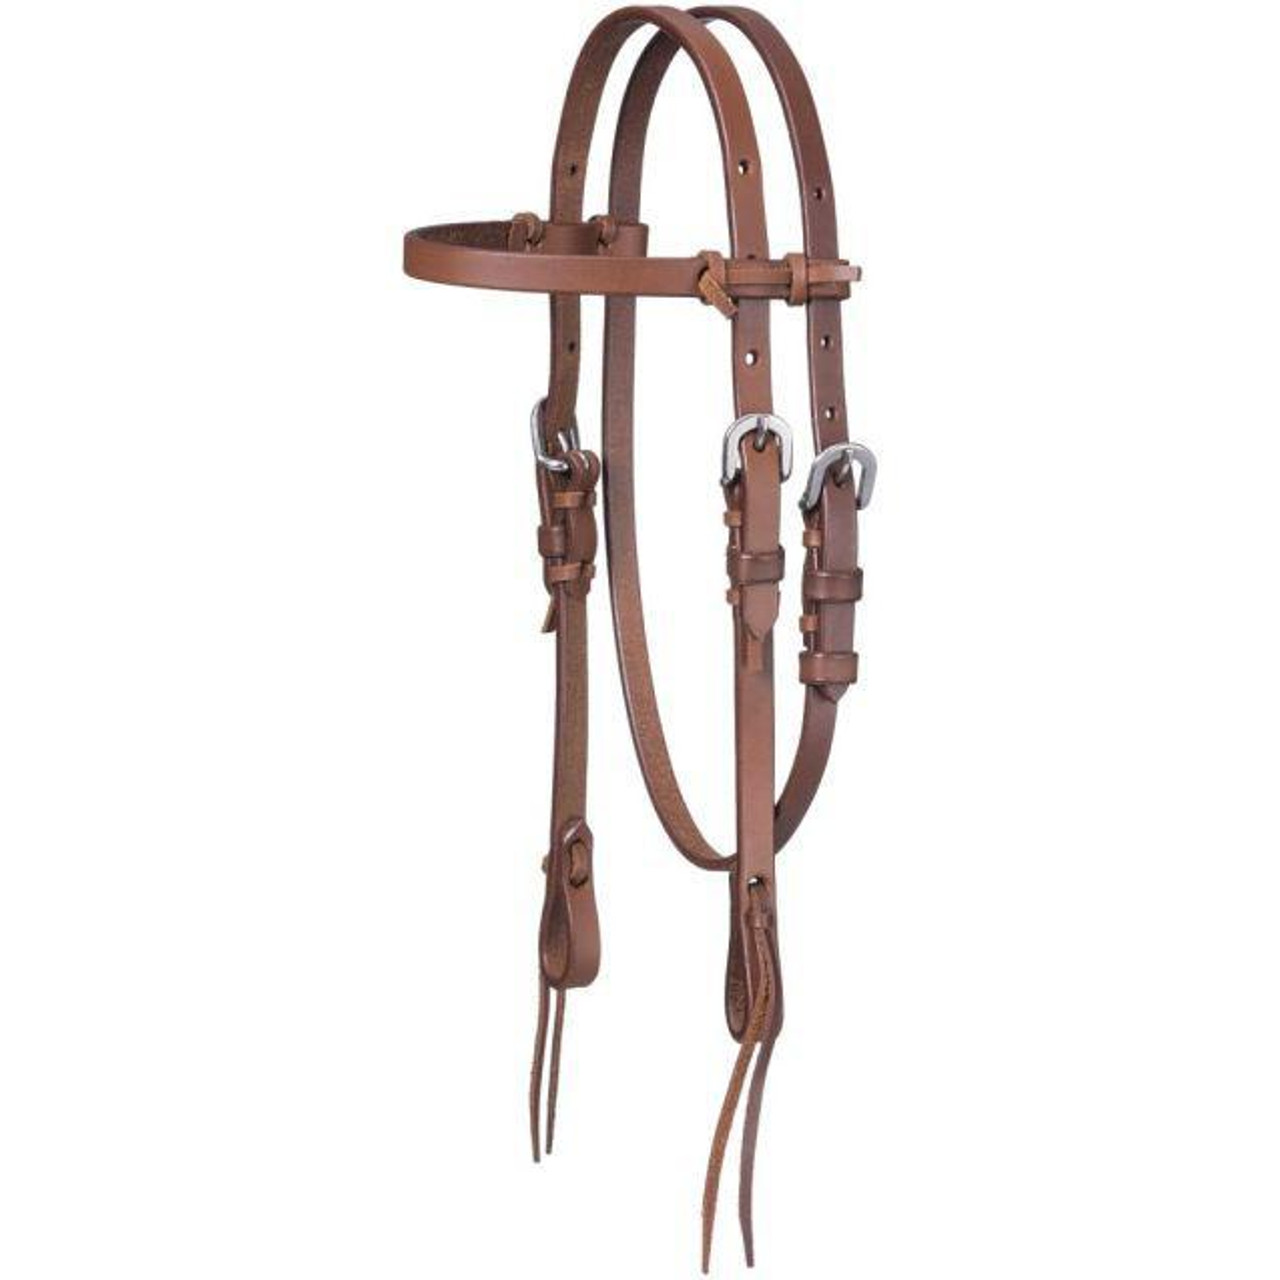 Billy Royal® Scalloped Silver Western Horse Show Halter